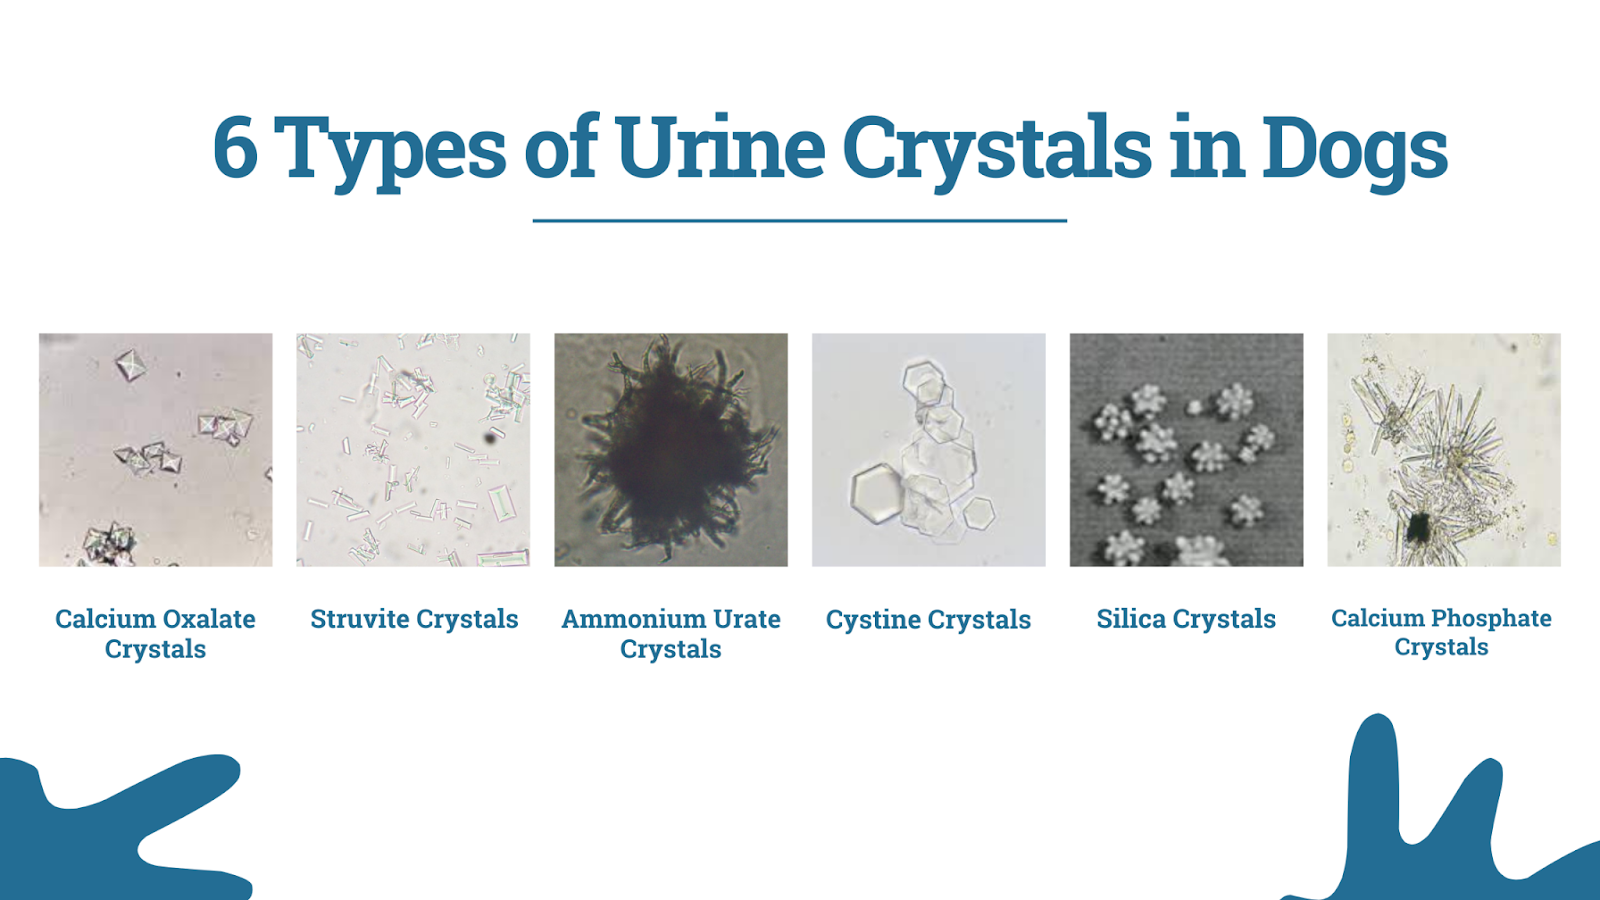 6 types of urine crystals in dogs